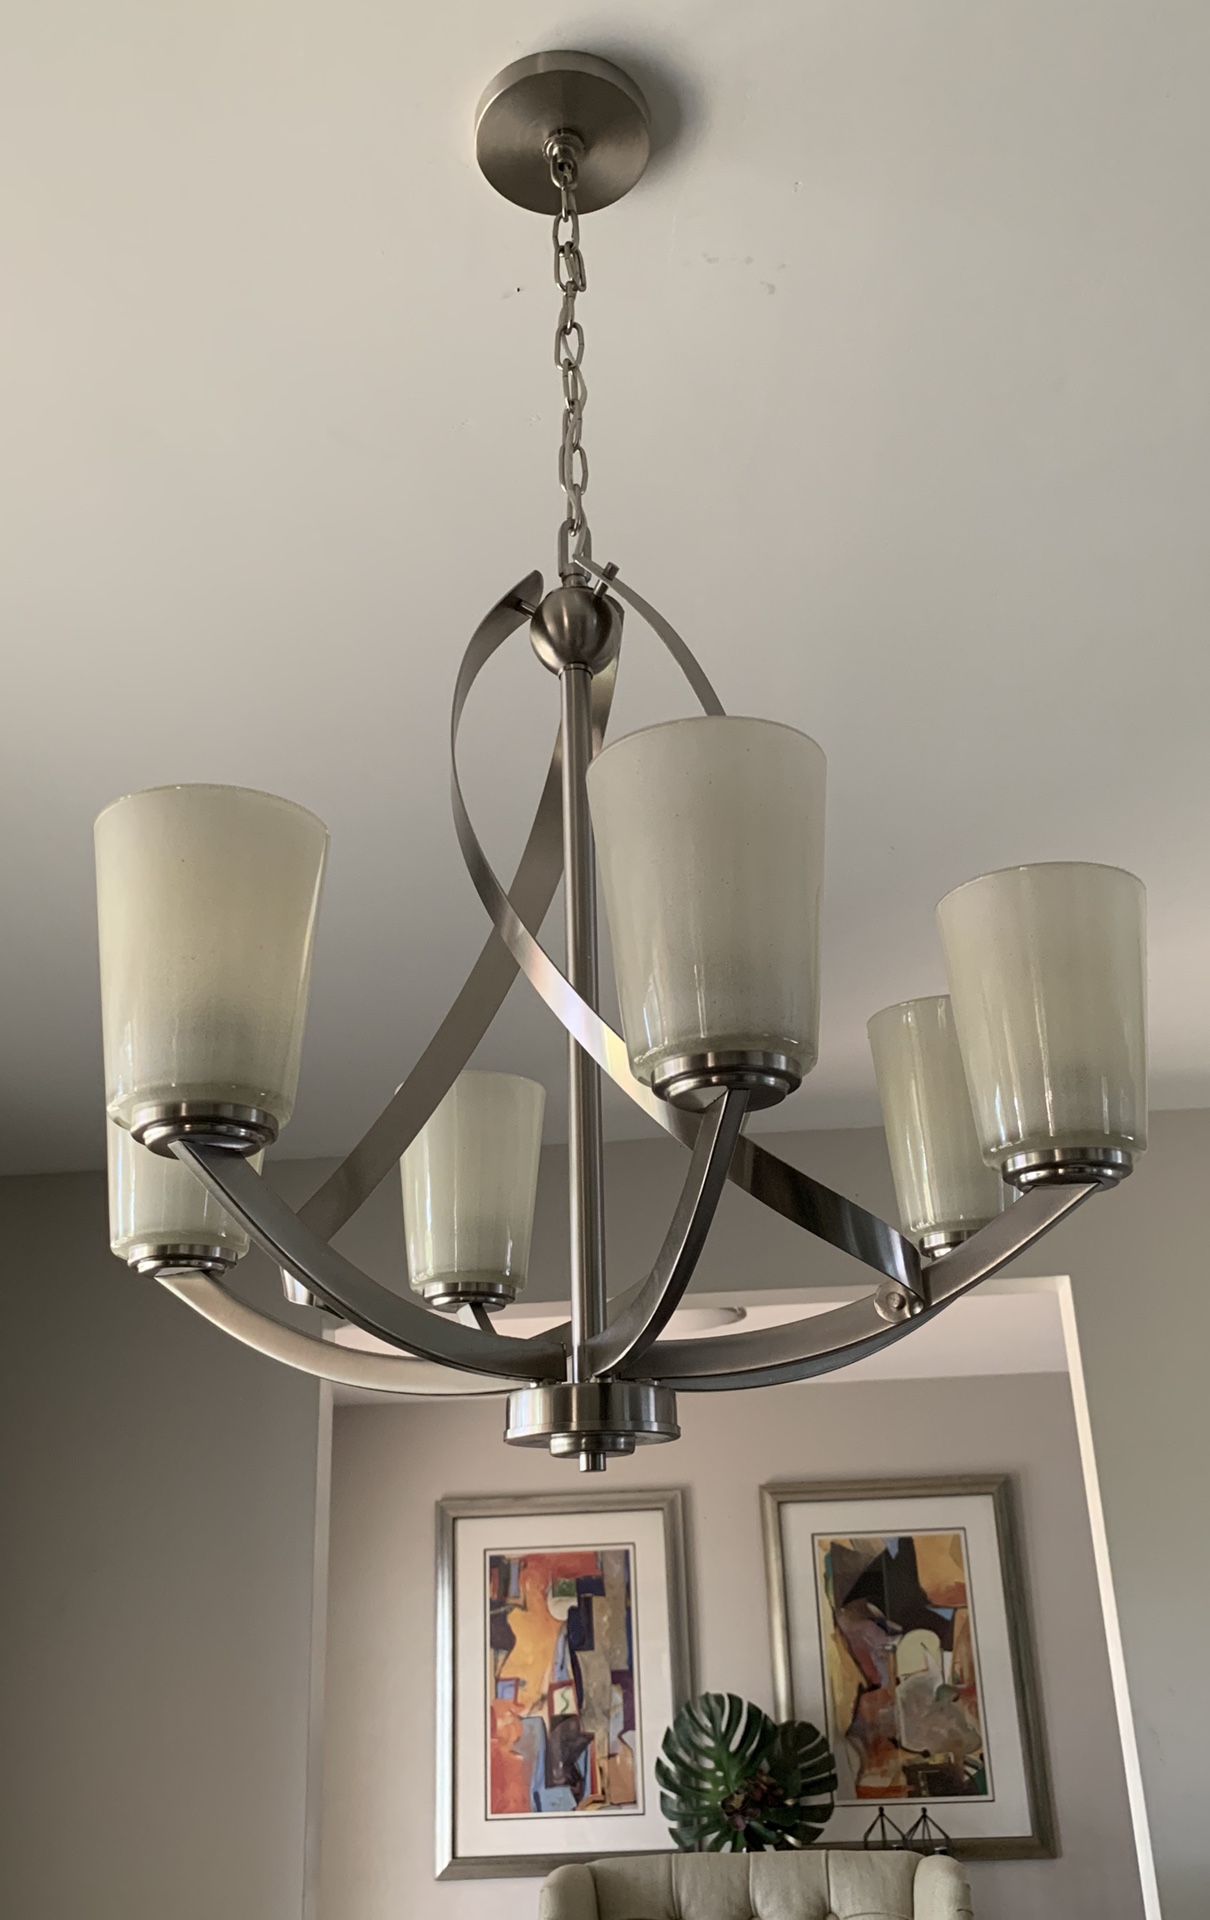 Brushed nickel multi-light ceiling lamp. Perfect condition!